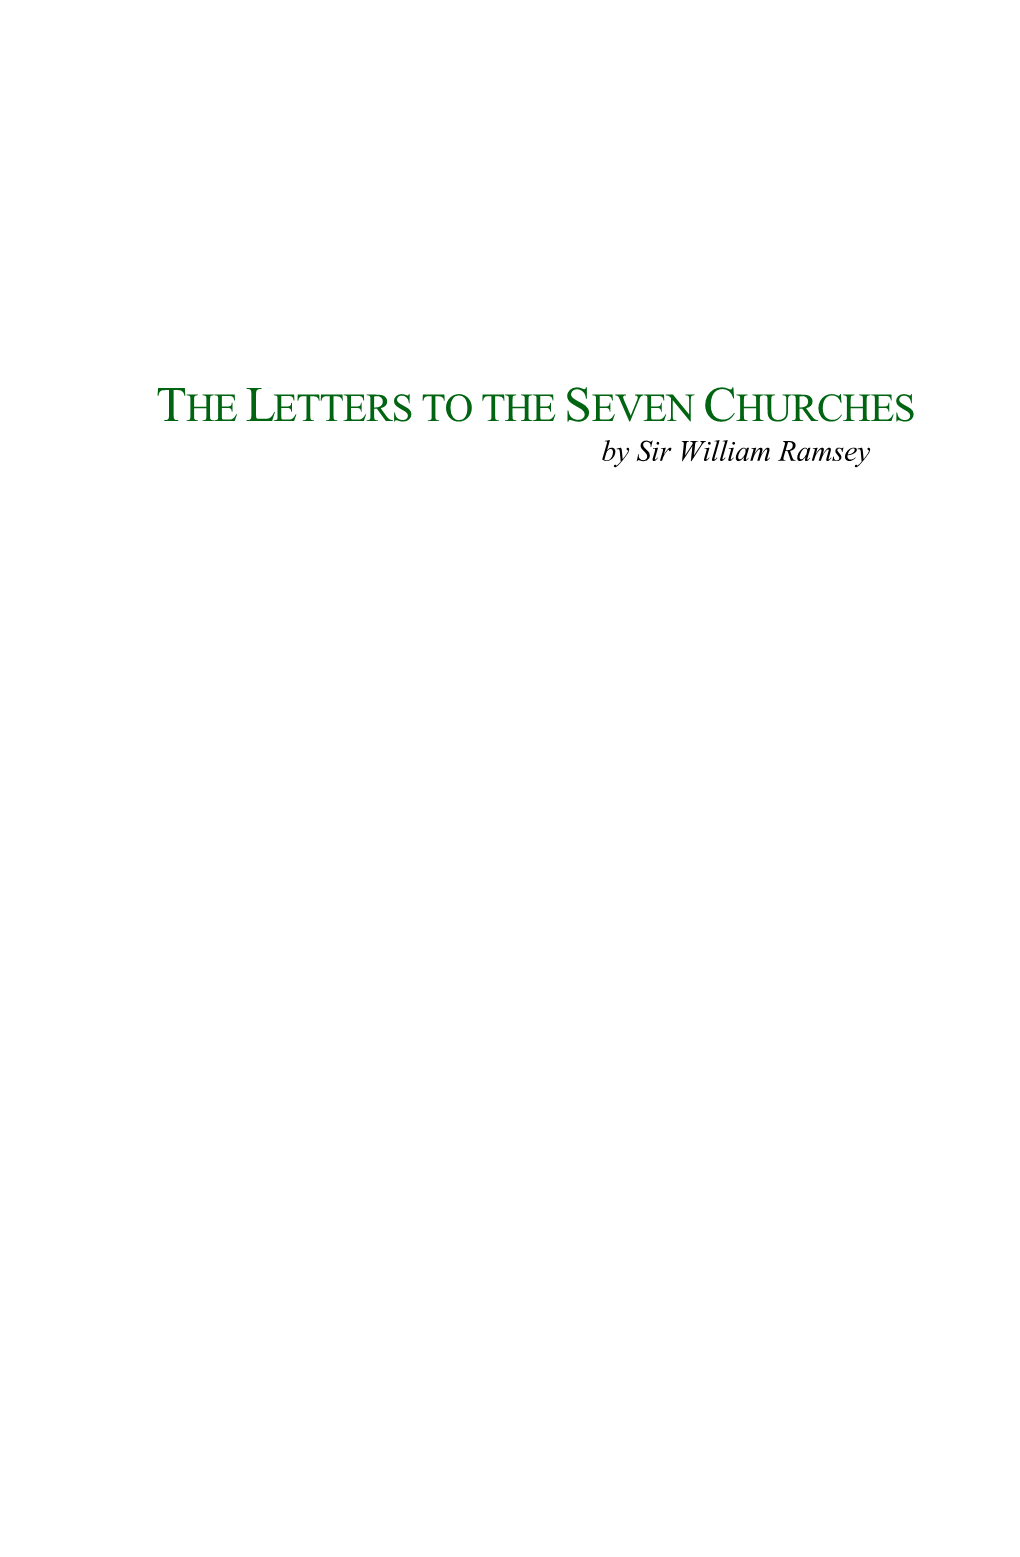 Letters to the 7 Churches